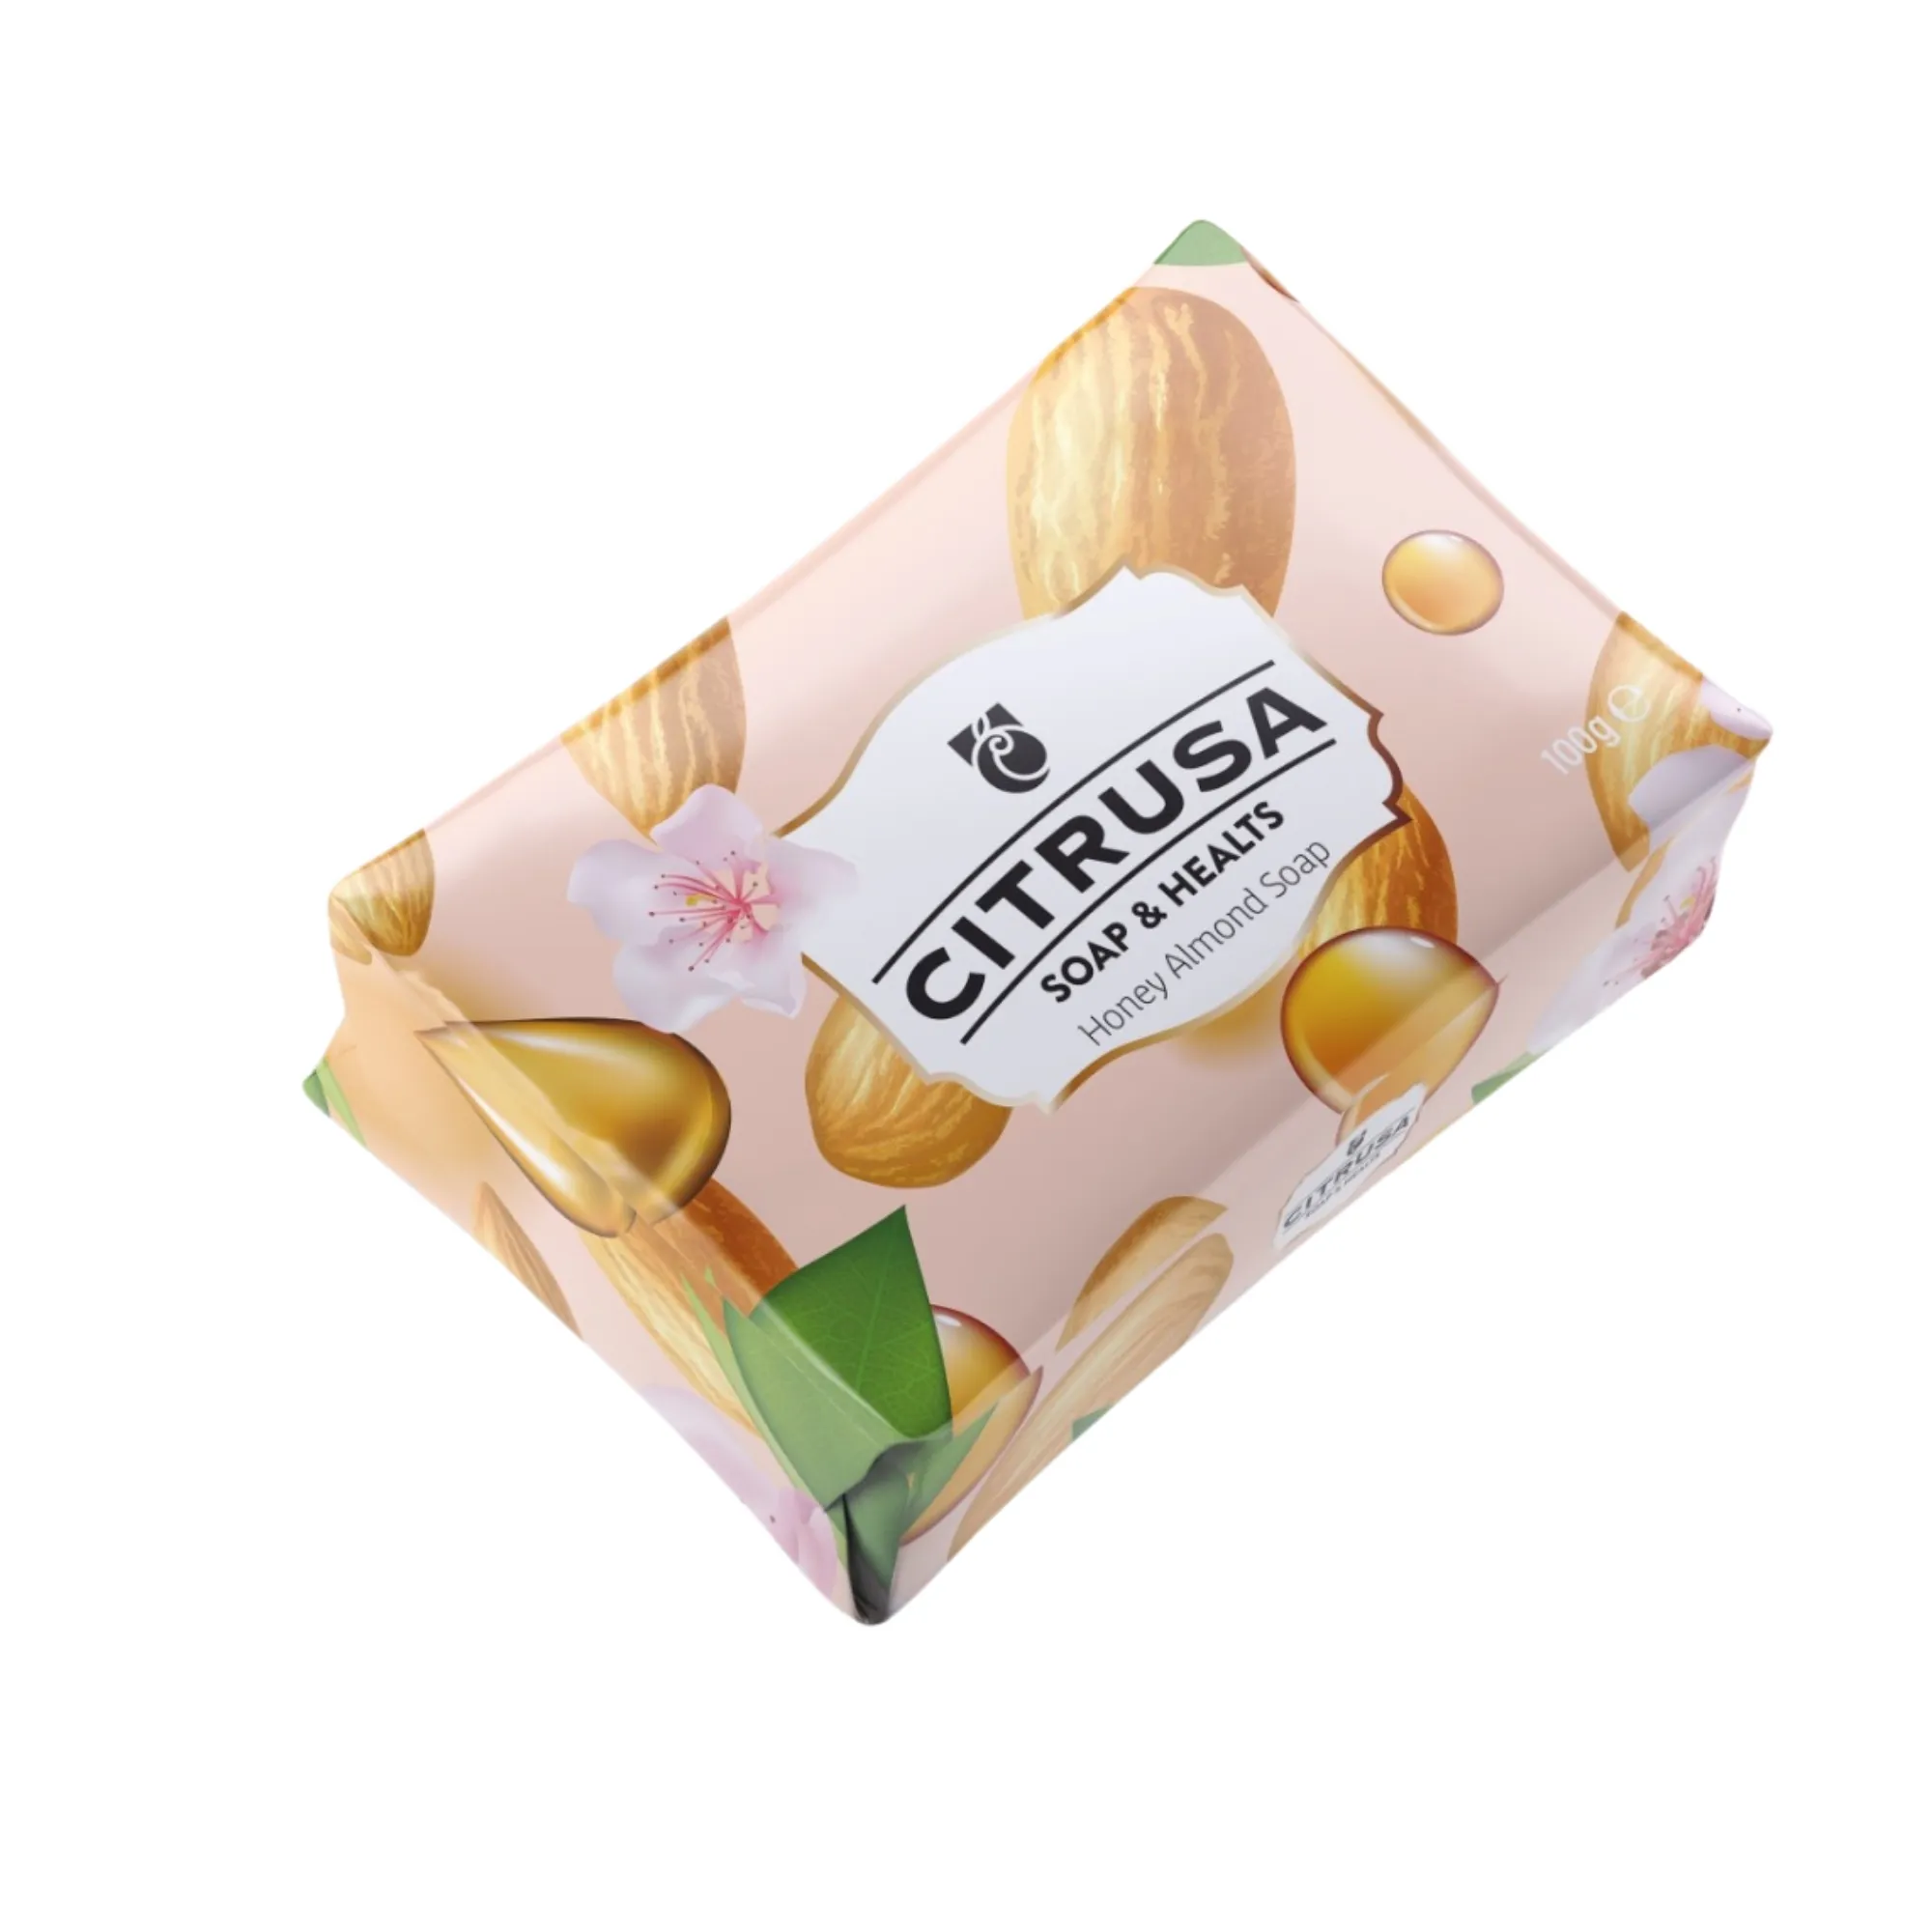 Antibacterial Soaps Natural Bath Soap Private Label Soap Manufacturer Personal Care Products Custom Label Packaging Scent